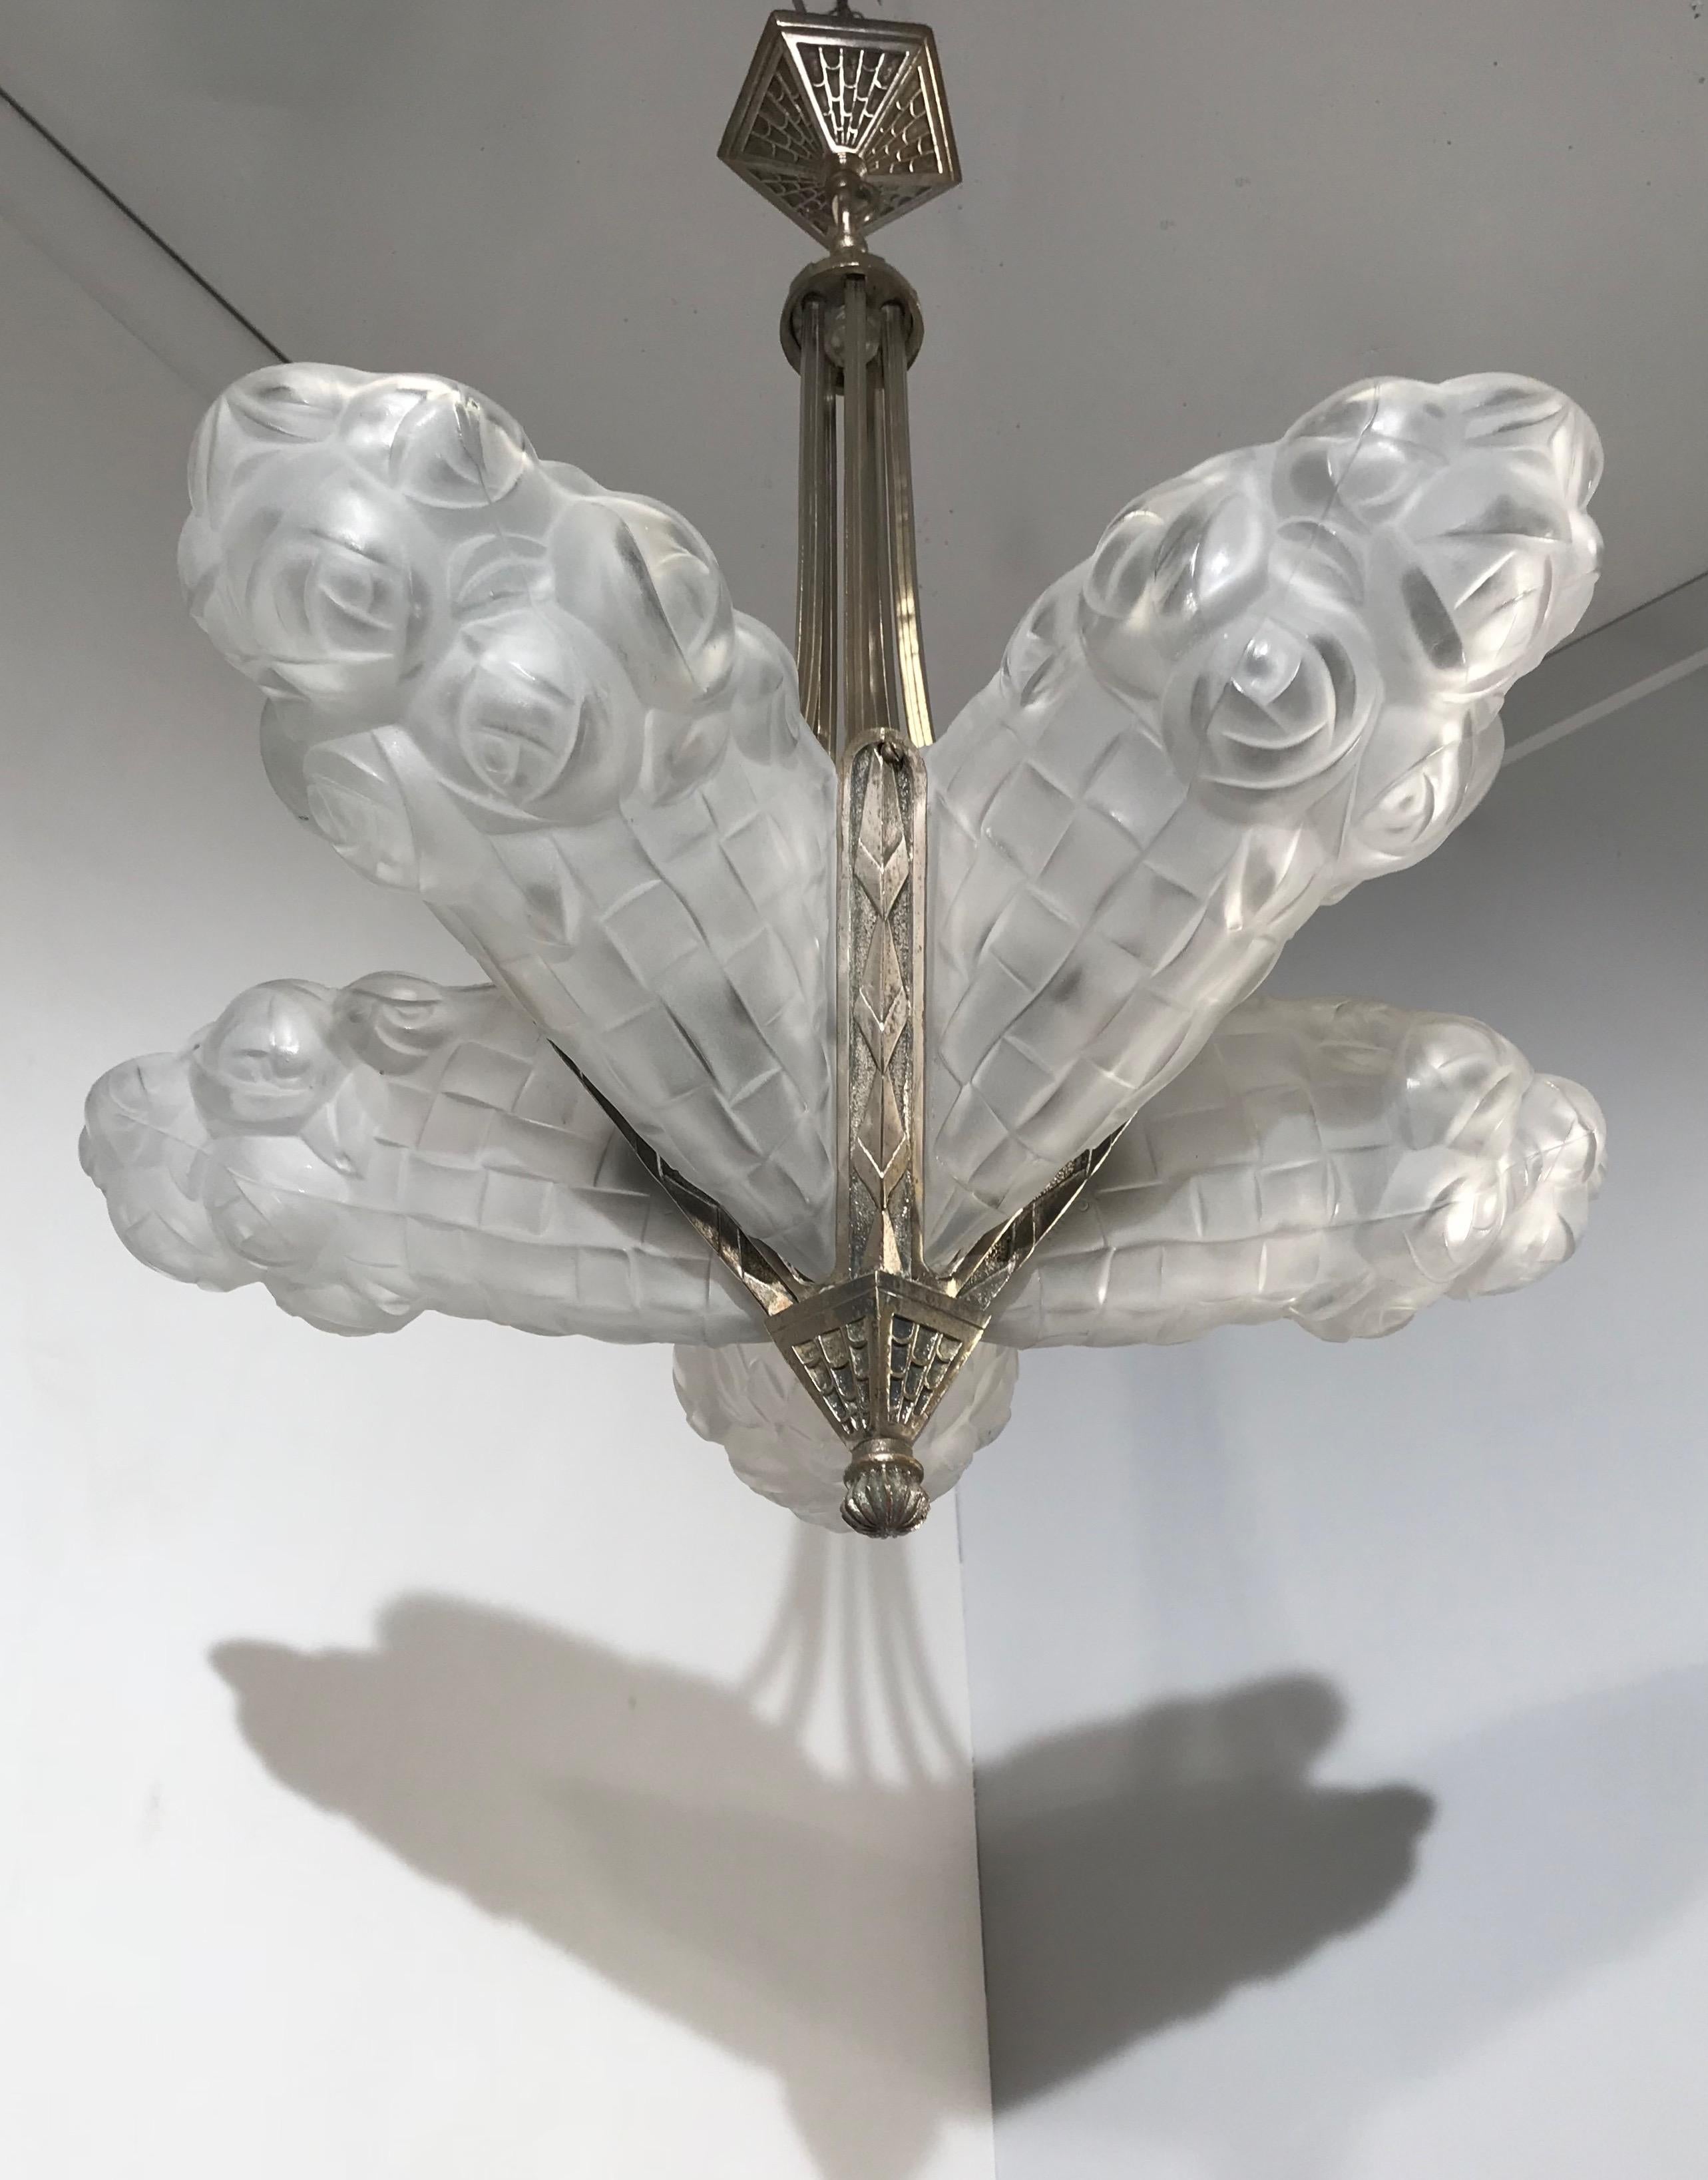 For the collectors of top quality stylish Art Deco pendants.

This early 20th century, practical size chandelier is by one of France's finest when it comes to Art Deco light fixtures. For the well-to-do, Degue was one of the brands to choose,